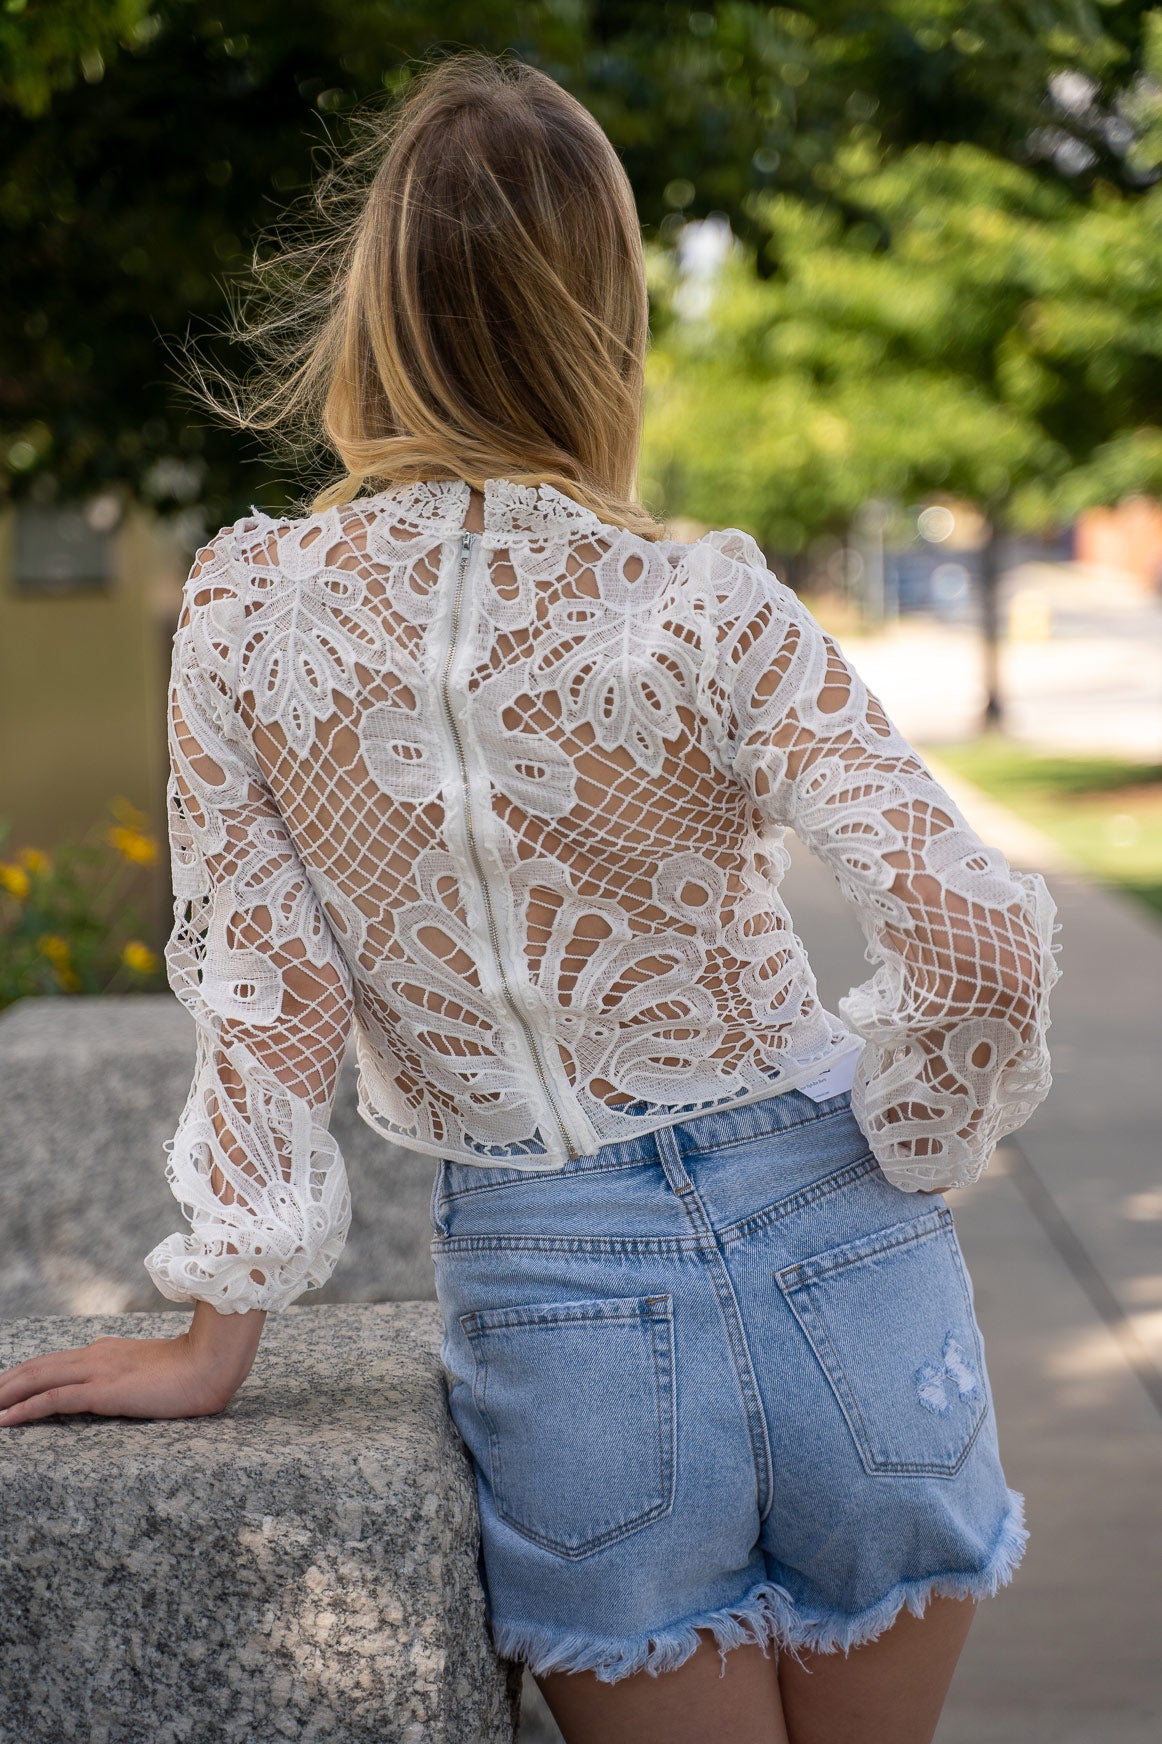 White Lace Long Sleeve Crop with Zipper Back